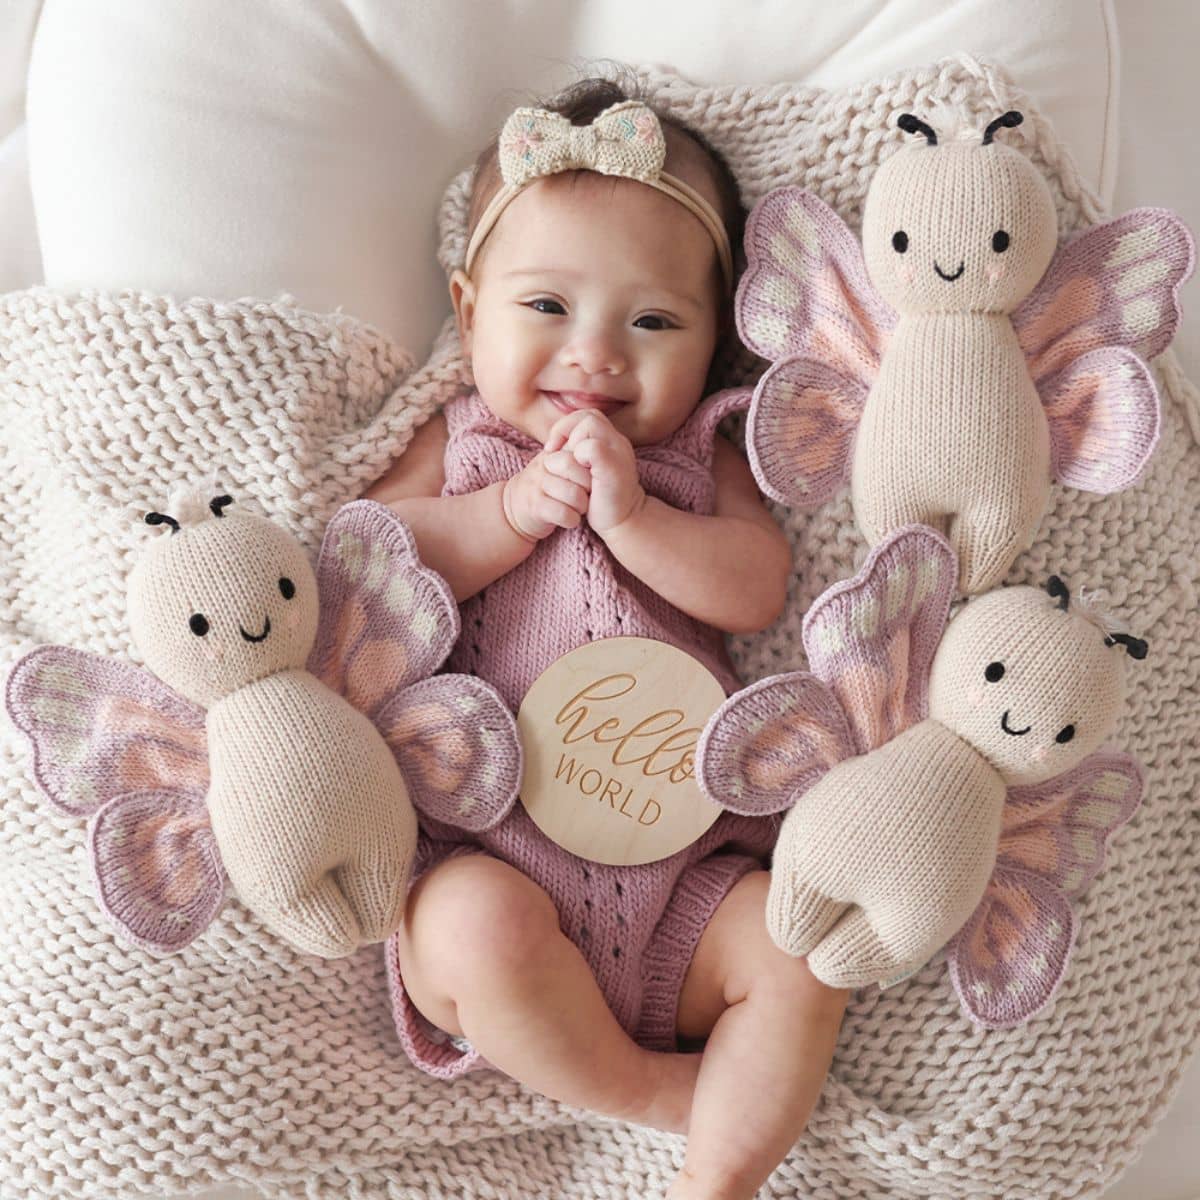 Cuddle + Kind Hand-Knit Doll - Baby Butterfly